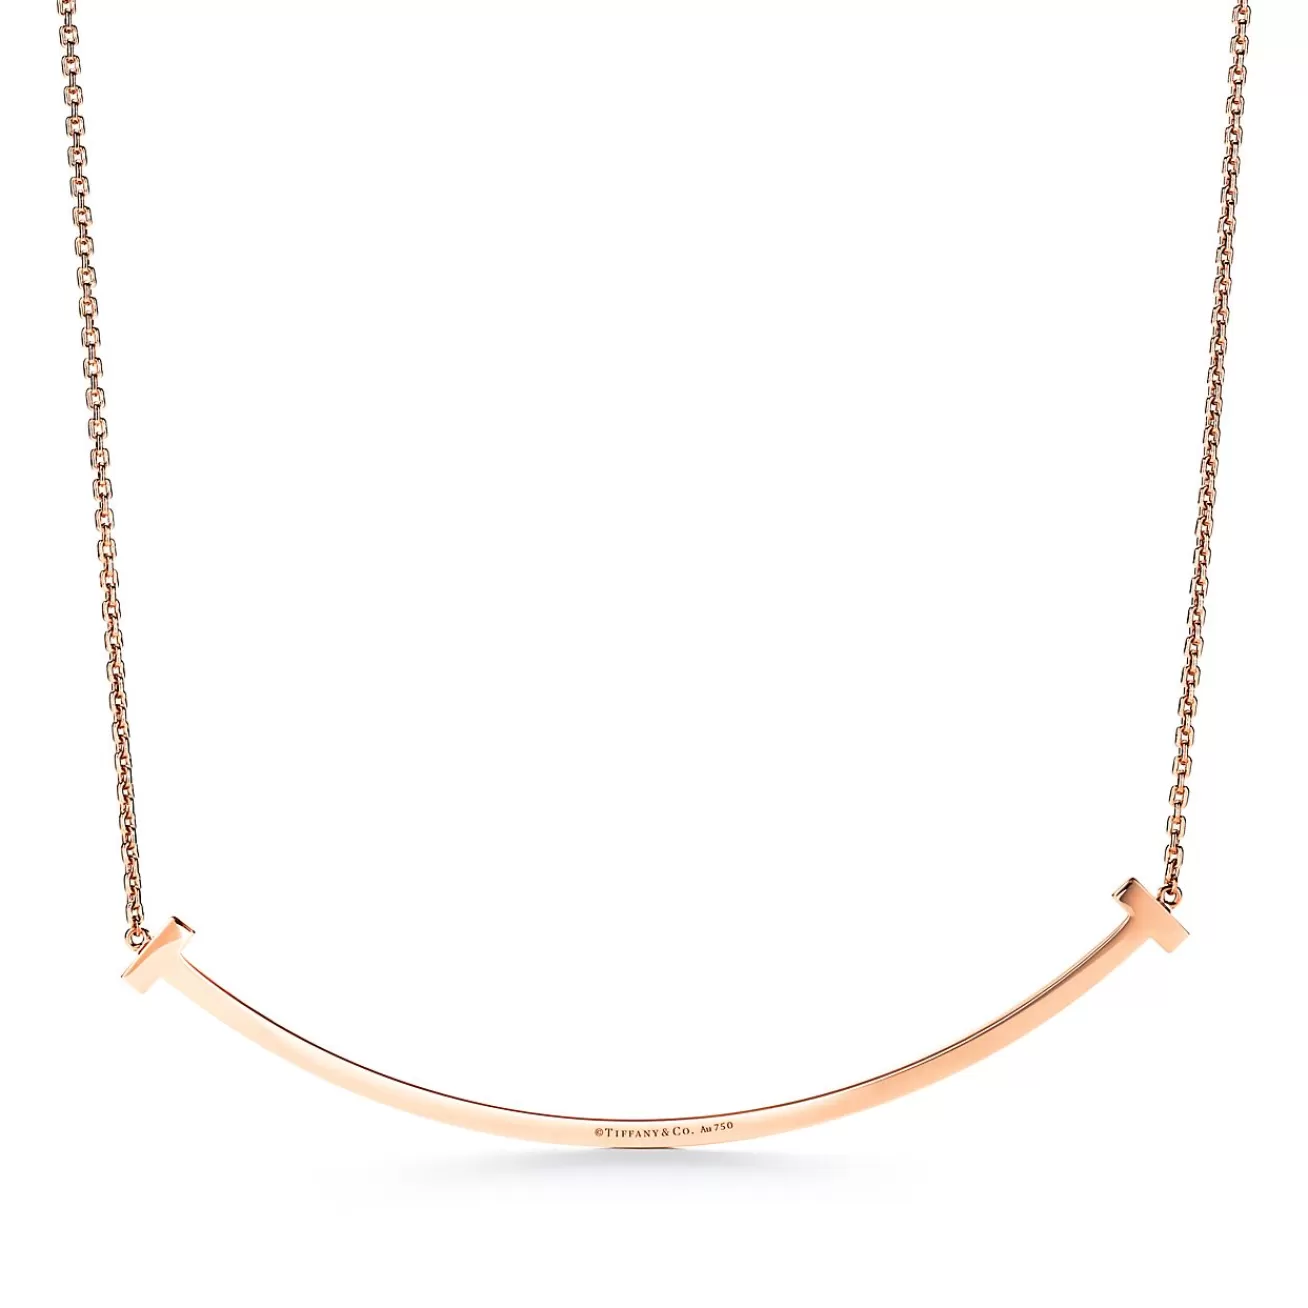 Tiffany & Co. Tiffany T extra large smile pendant in 18k rose gold. | ^ Necklaces & Pendants | Men's Jewelry